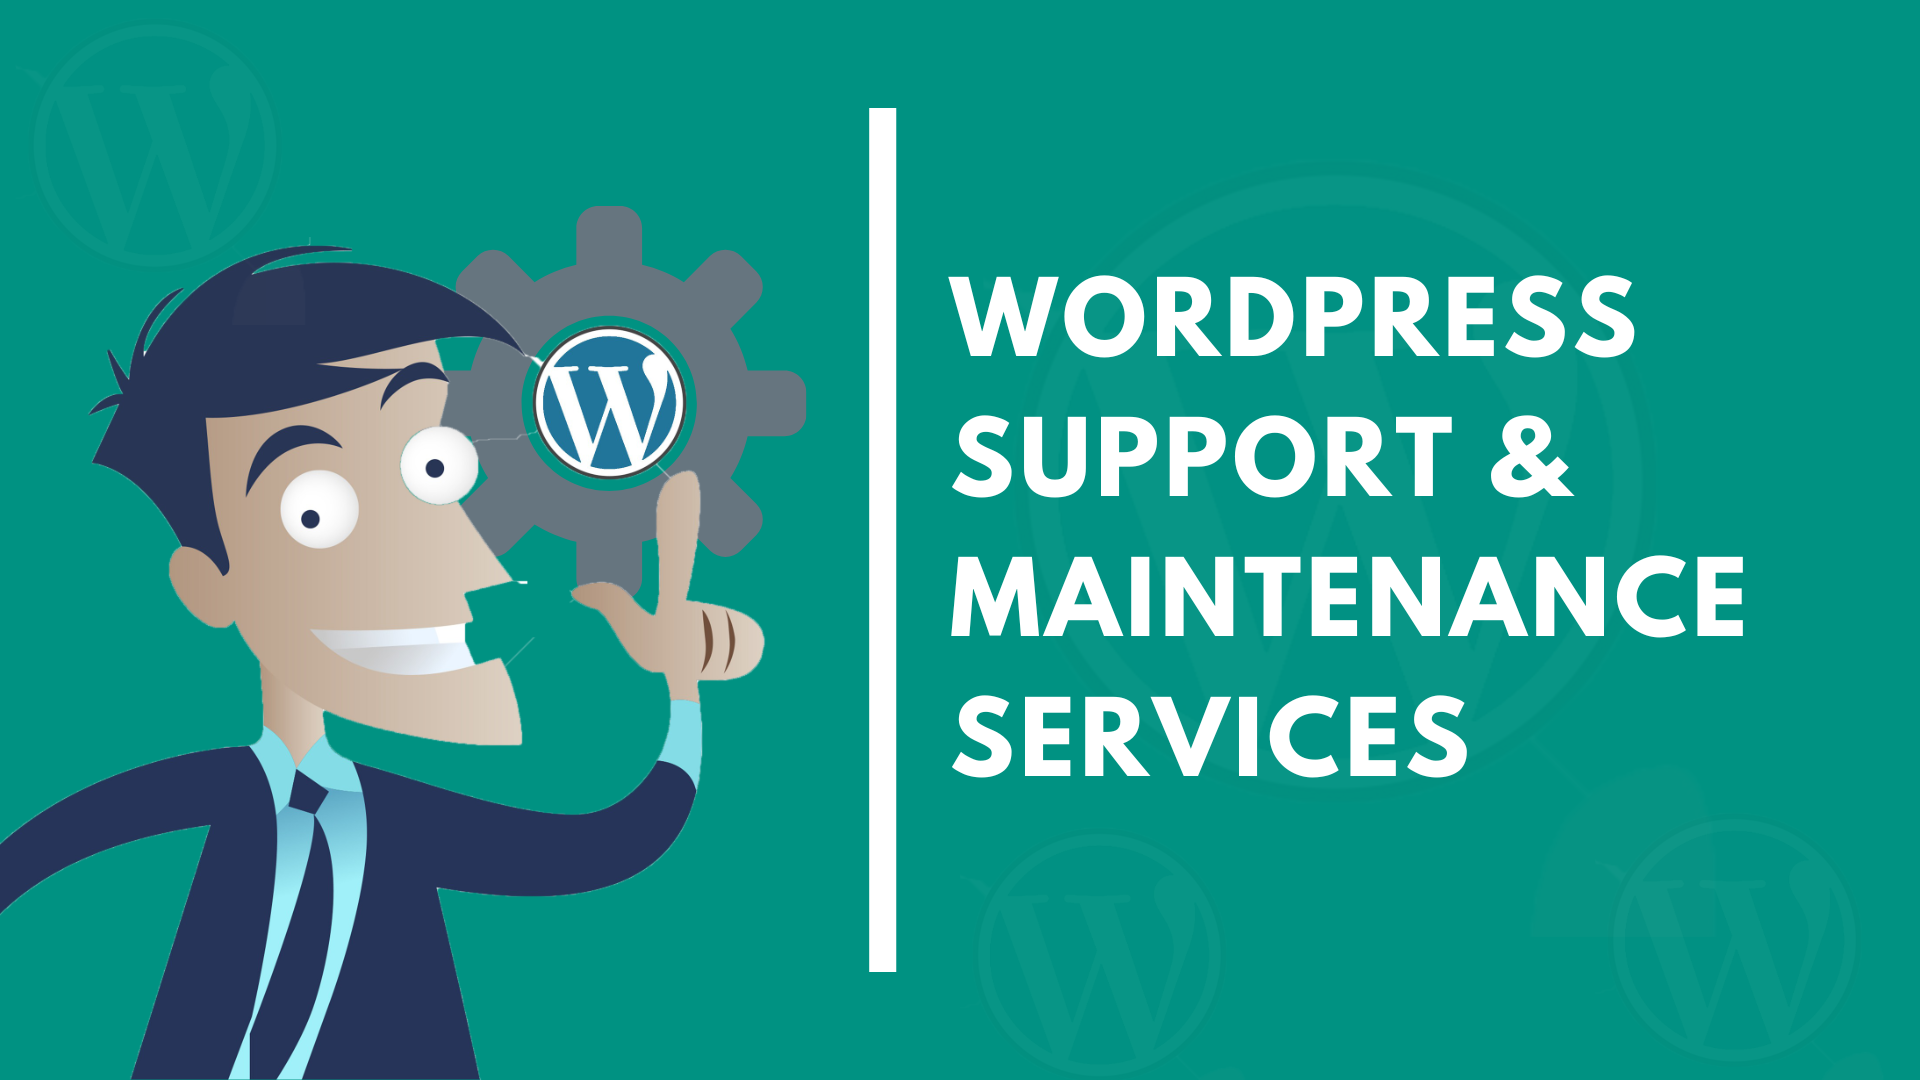 Are you looking for WordPress Support Maintenance Services?